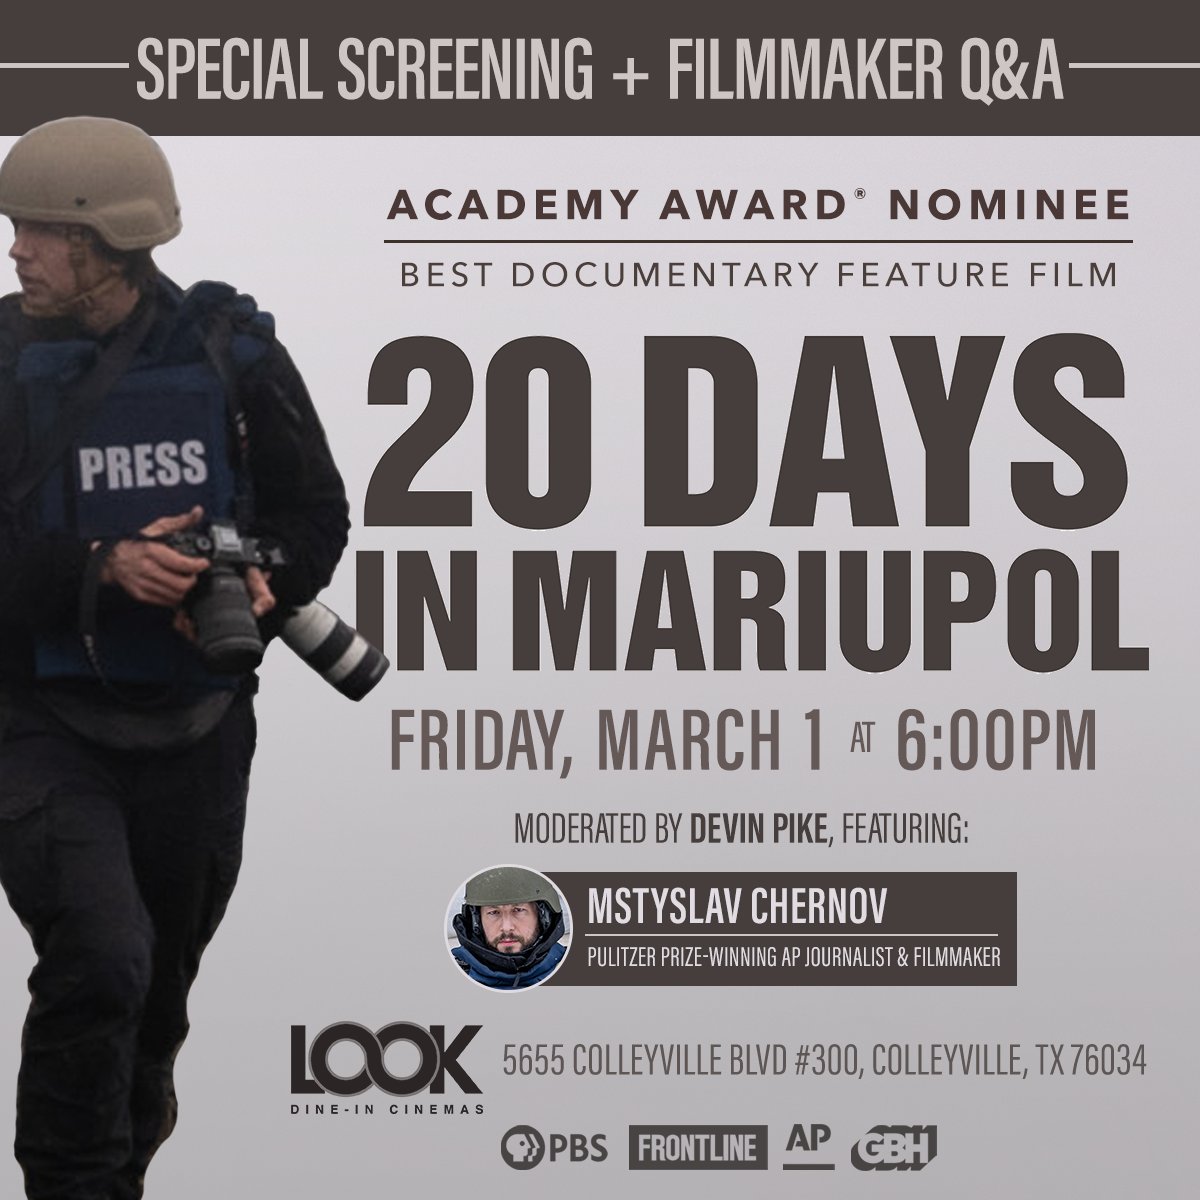 “Essential. A relentless and truly important documentary.” – @nytimes The Academy Award®-nominated documentary #20DaysInMariupol comes to #DFW area Mar. 1 for a special screening + filmmaker Q&A with w/ @mstyslavchernov. ➡️ bit.ly/20DaysDFW @redcarpetcrash